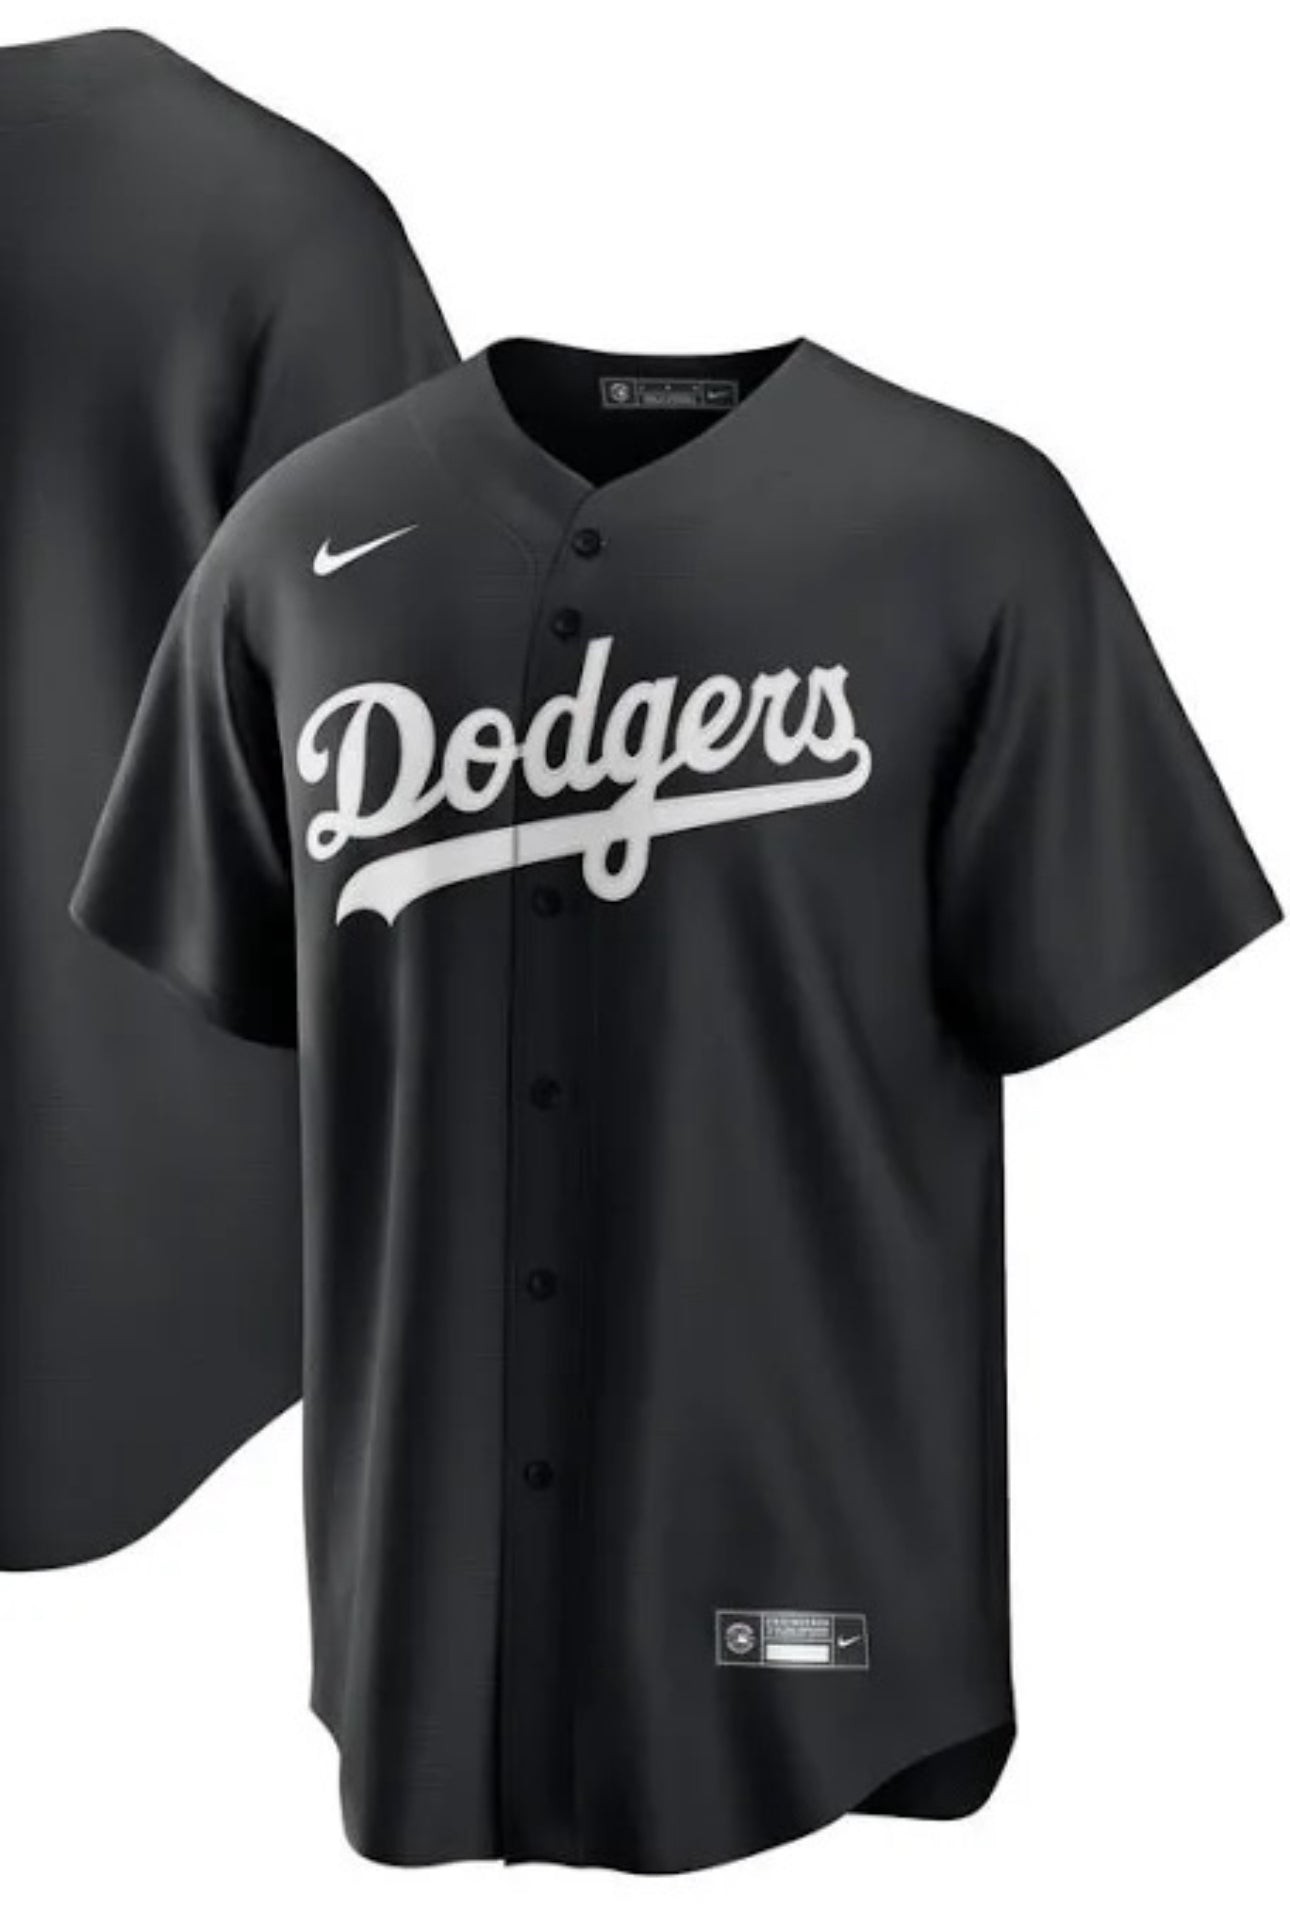 Youth Dodgers jersey